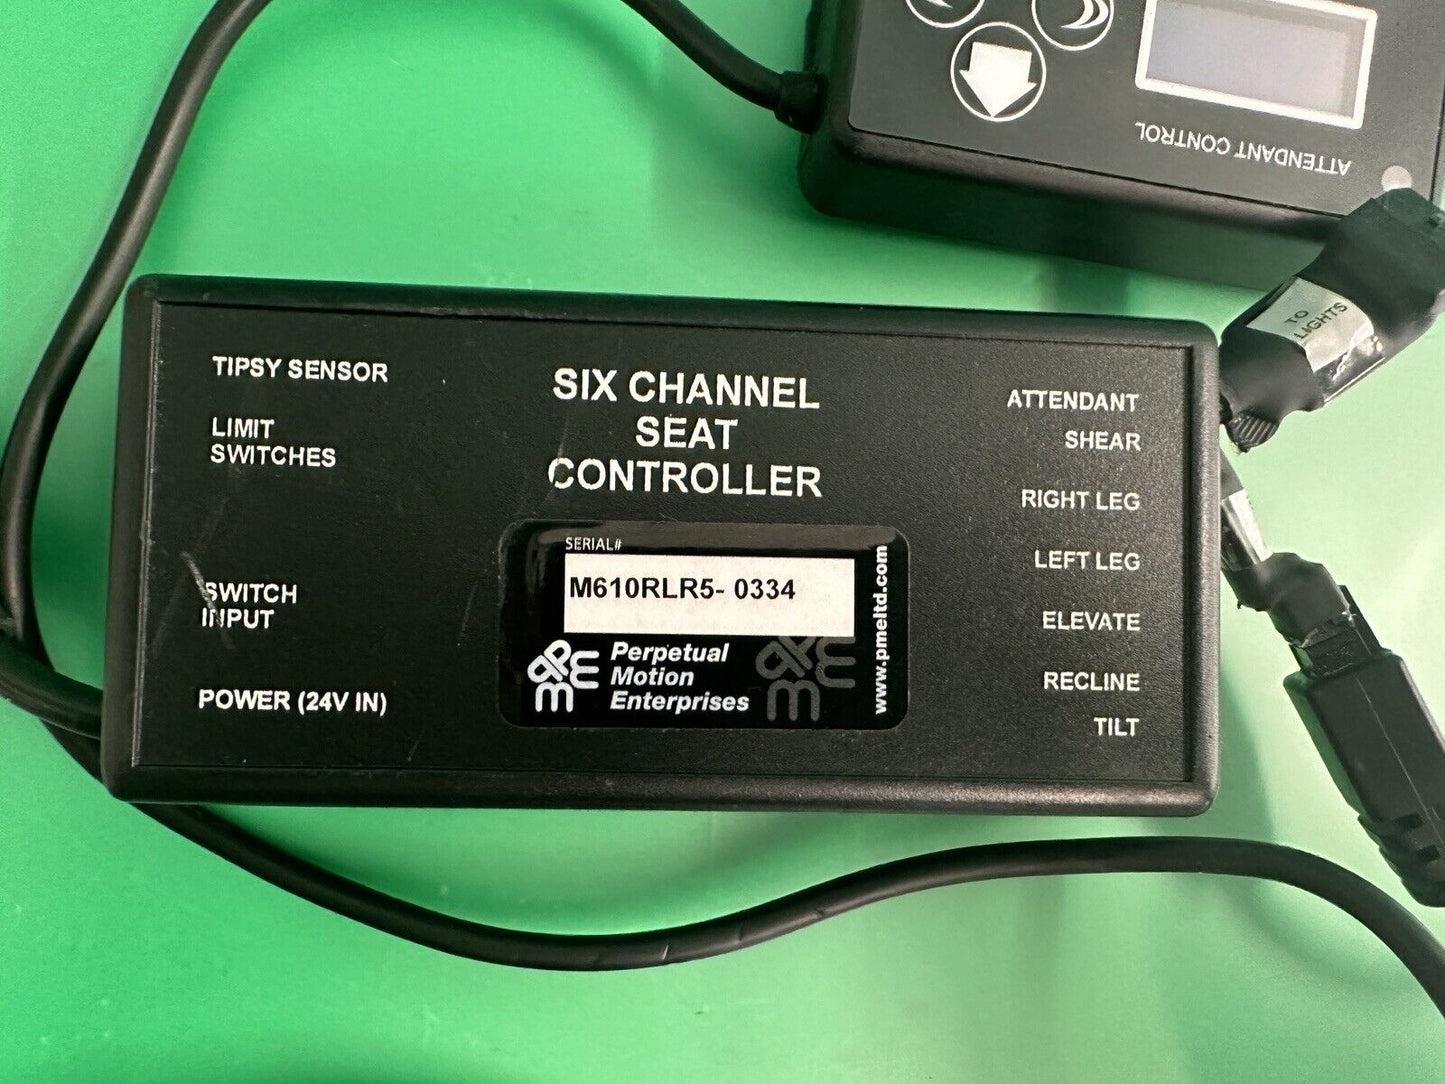 RNET Six Channel Seat Controller w/ Attendant Control for Power Wheelchair #i558